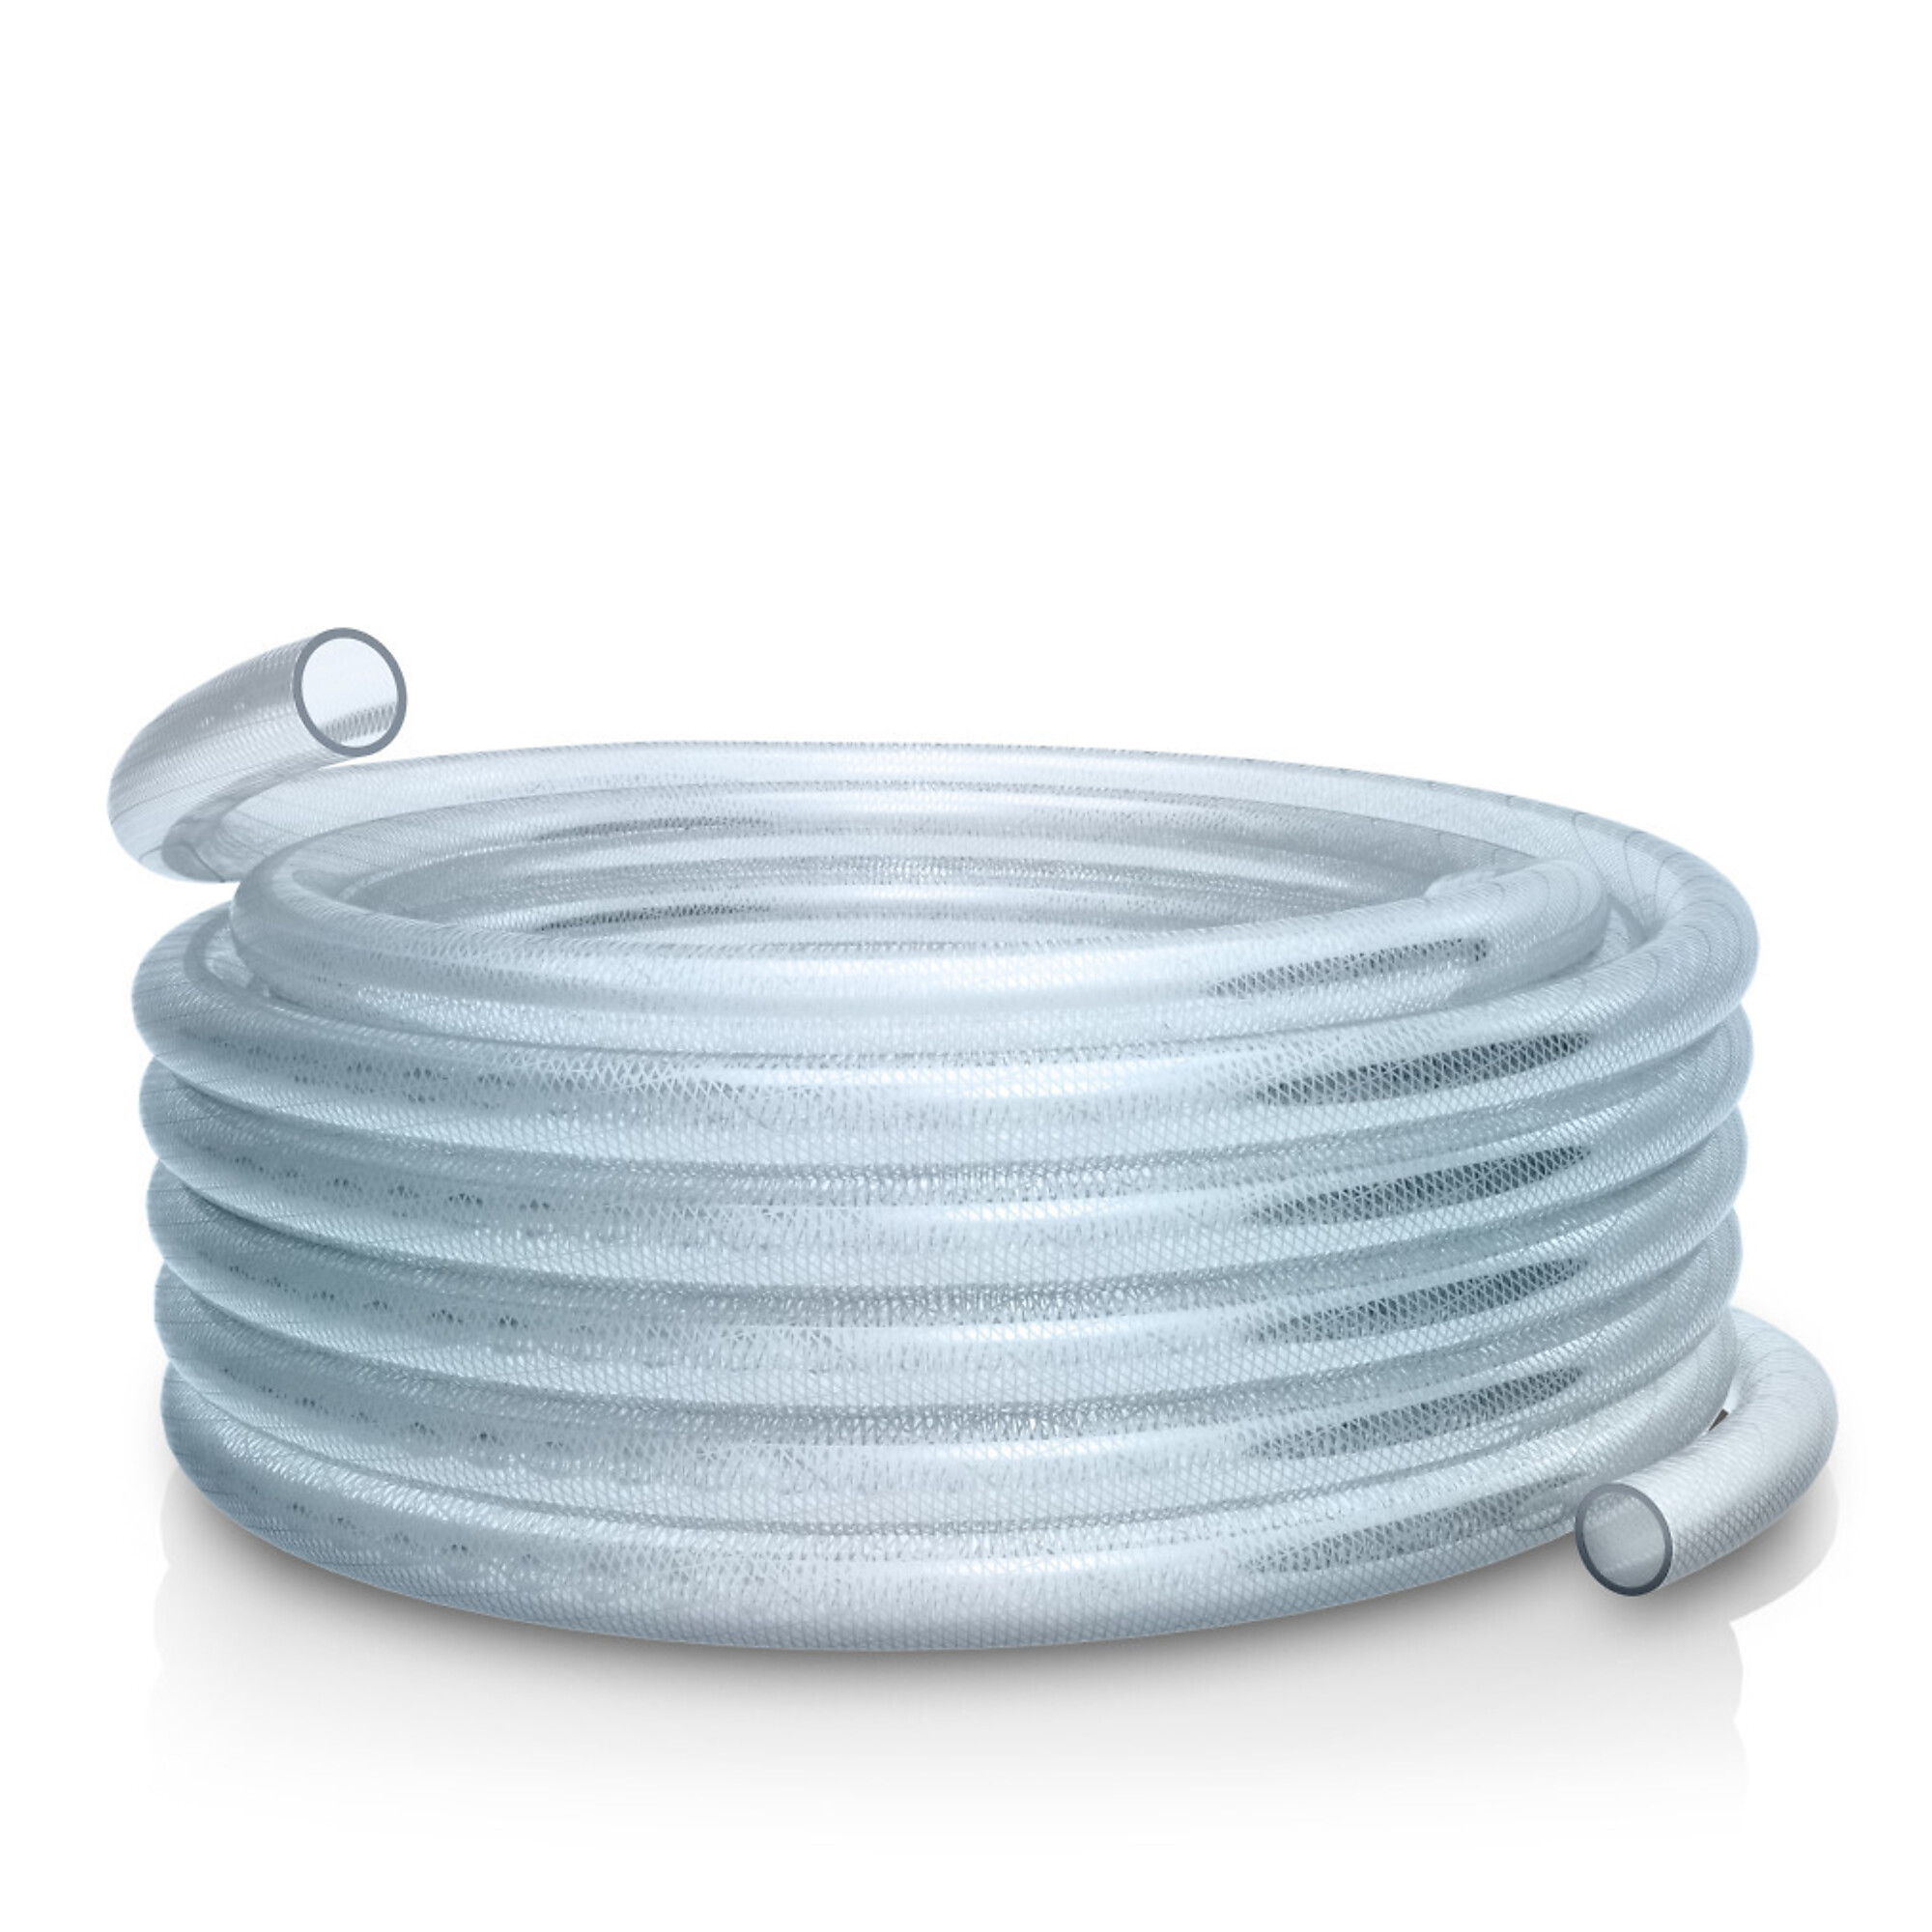 Alpine Corporation, 3/8Inch I.D. PVC Clear Braided Tubing x 100ft. Coil, Model VR038